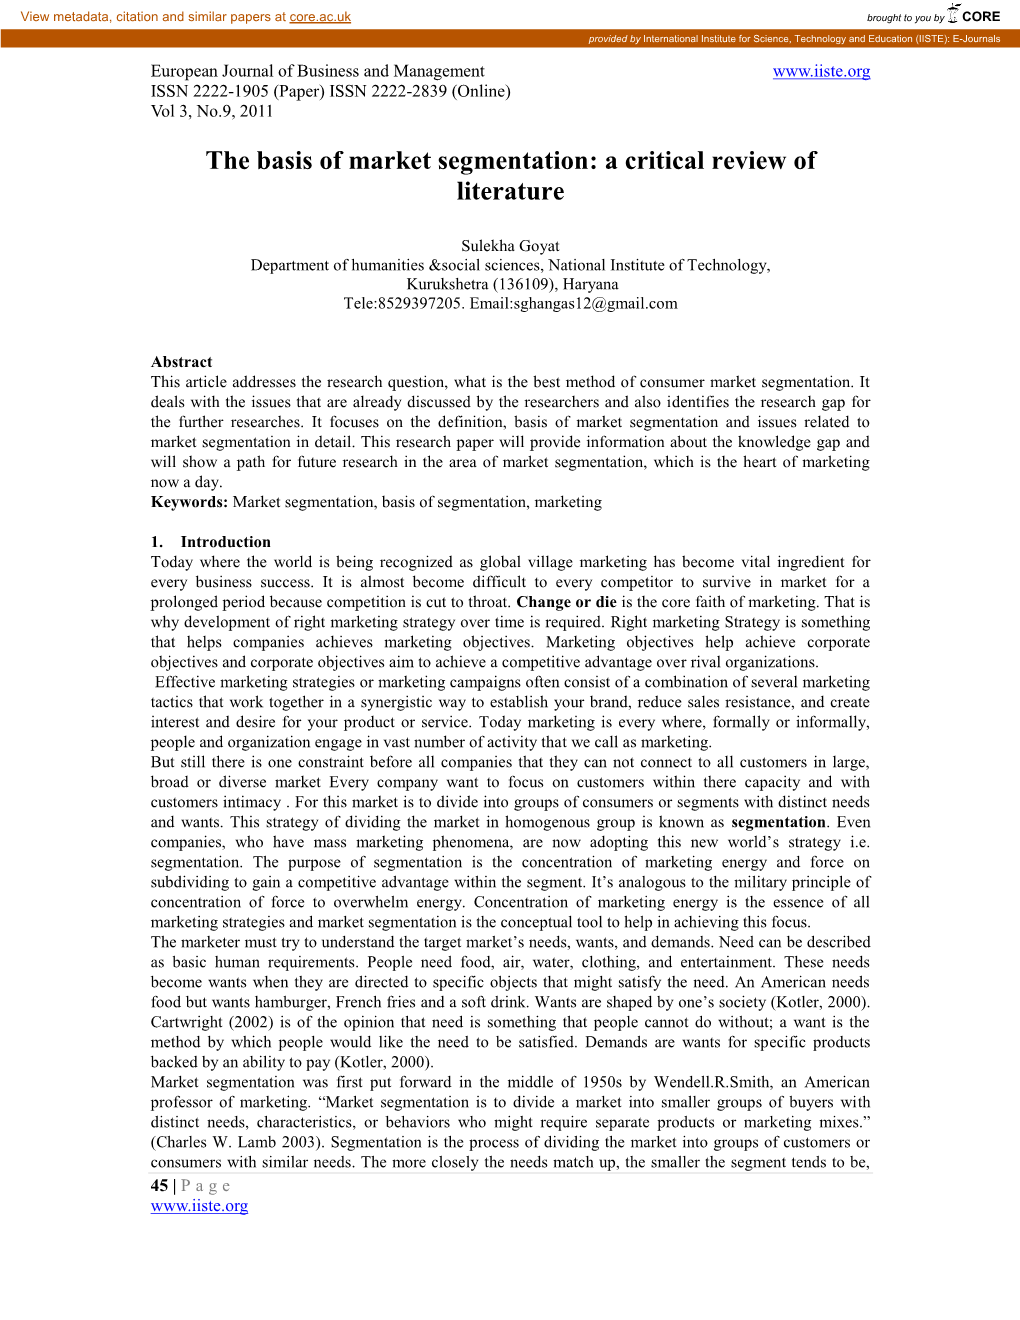 The Basis of Market Segmentation: a Critical Review of Literature